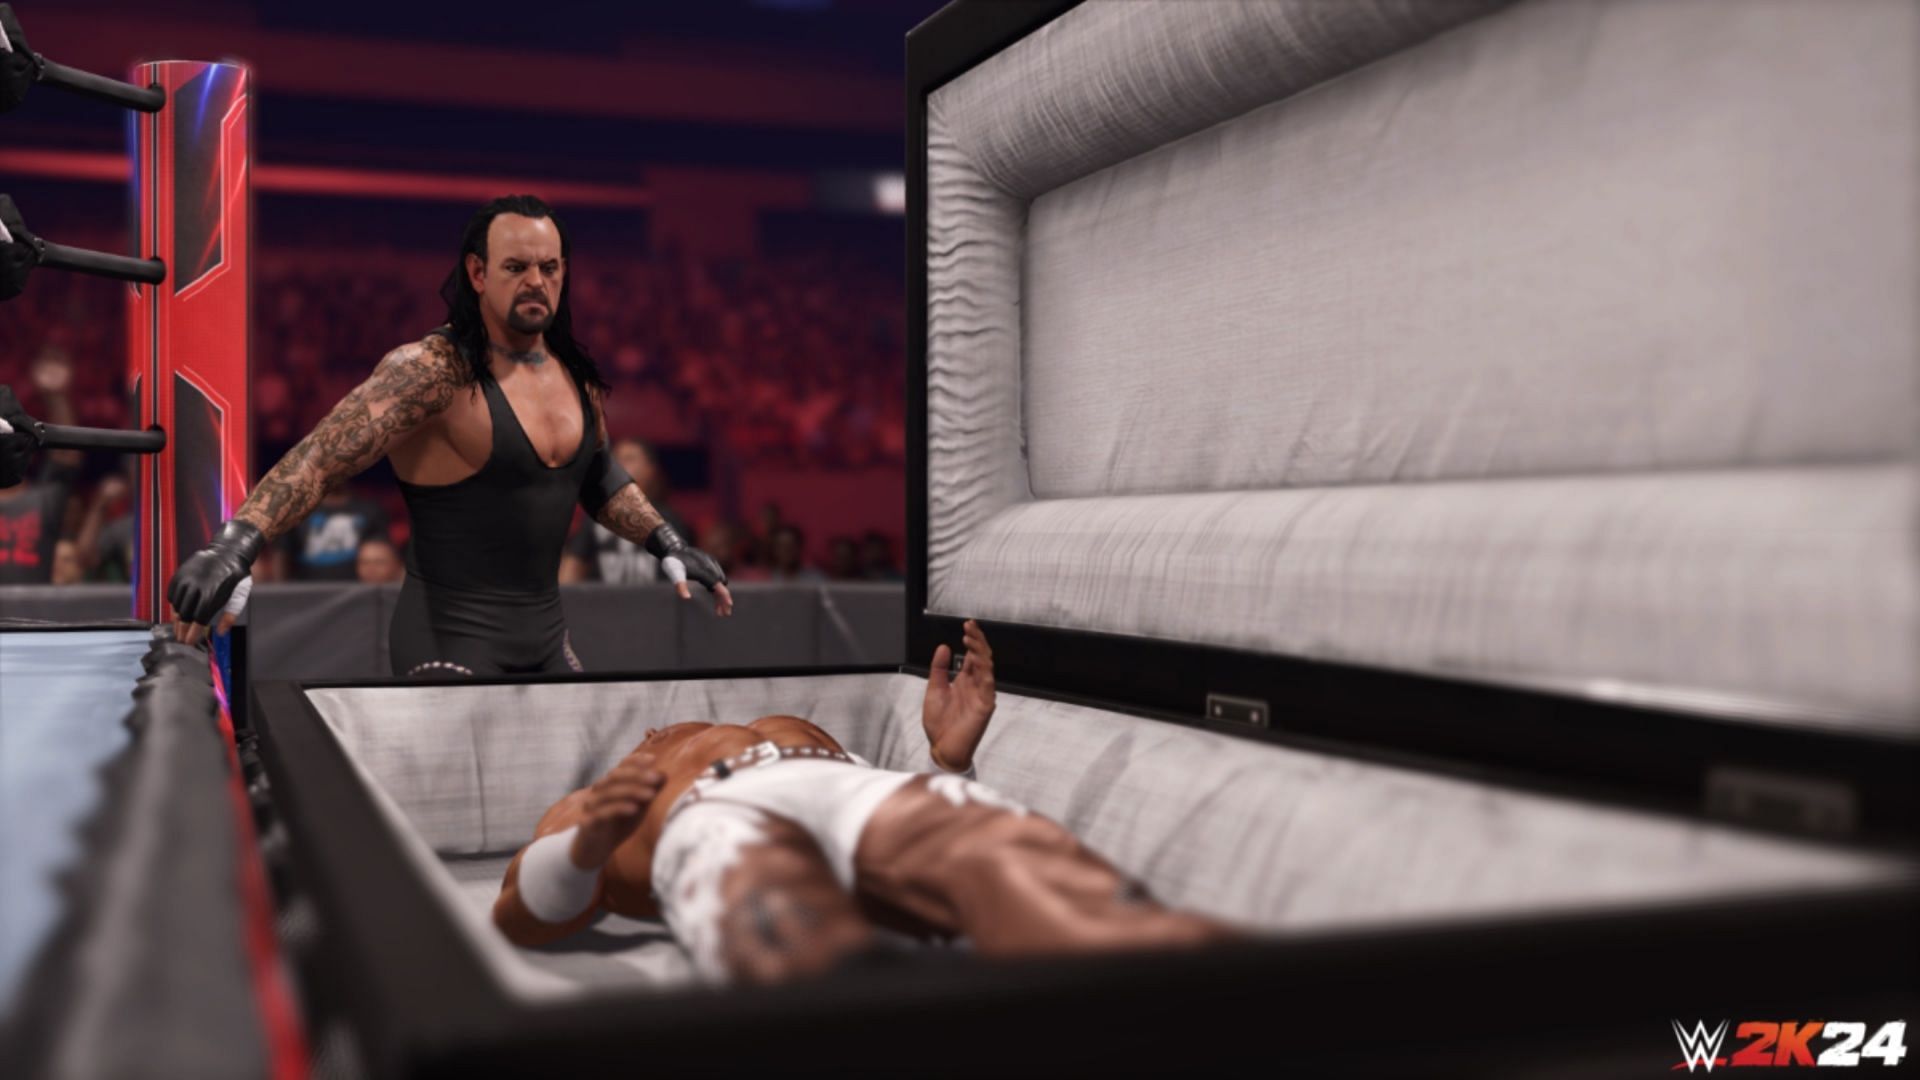 WWE 2K24 is set to release on March 8, 2024.